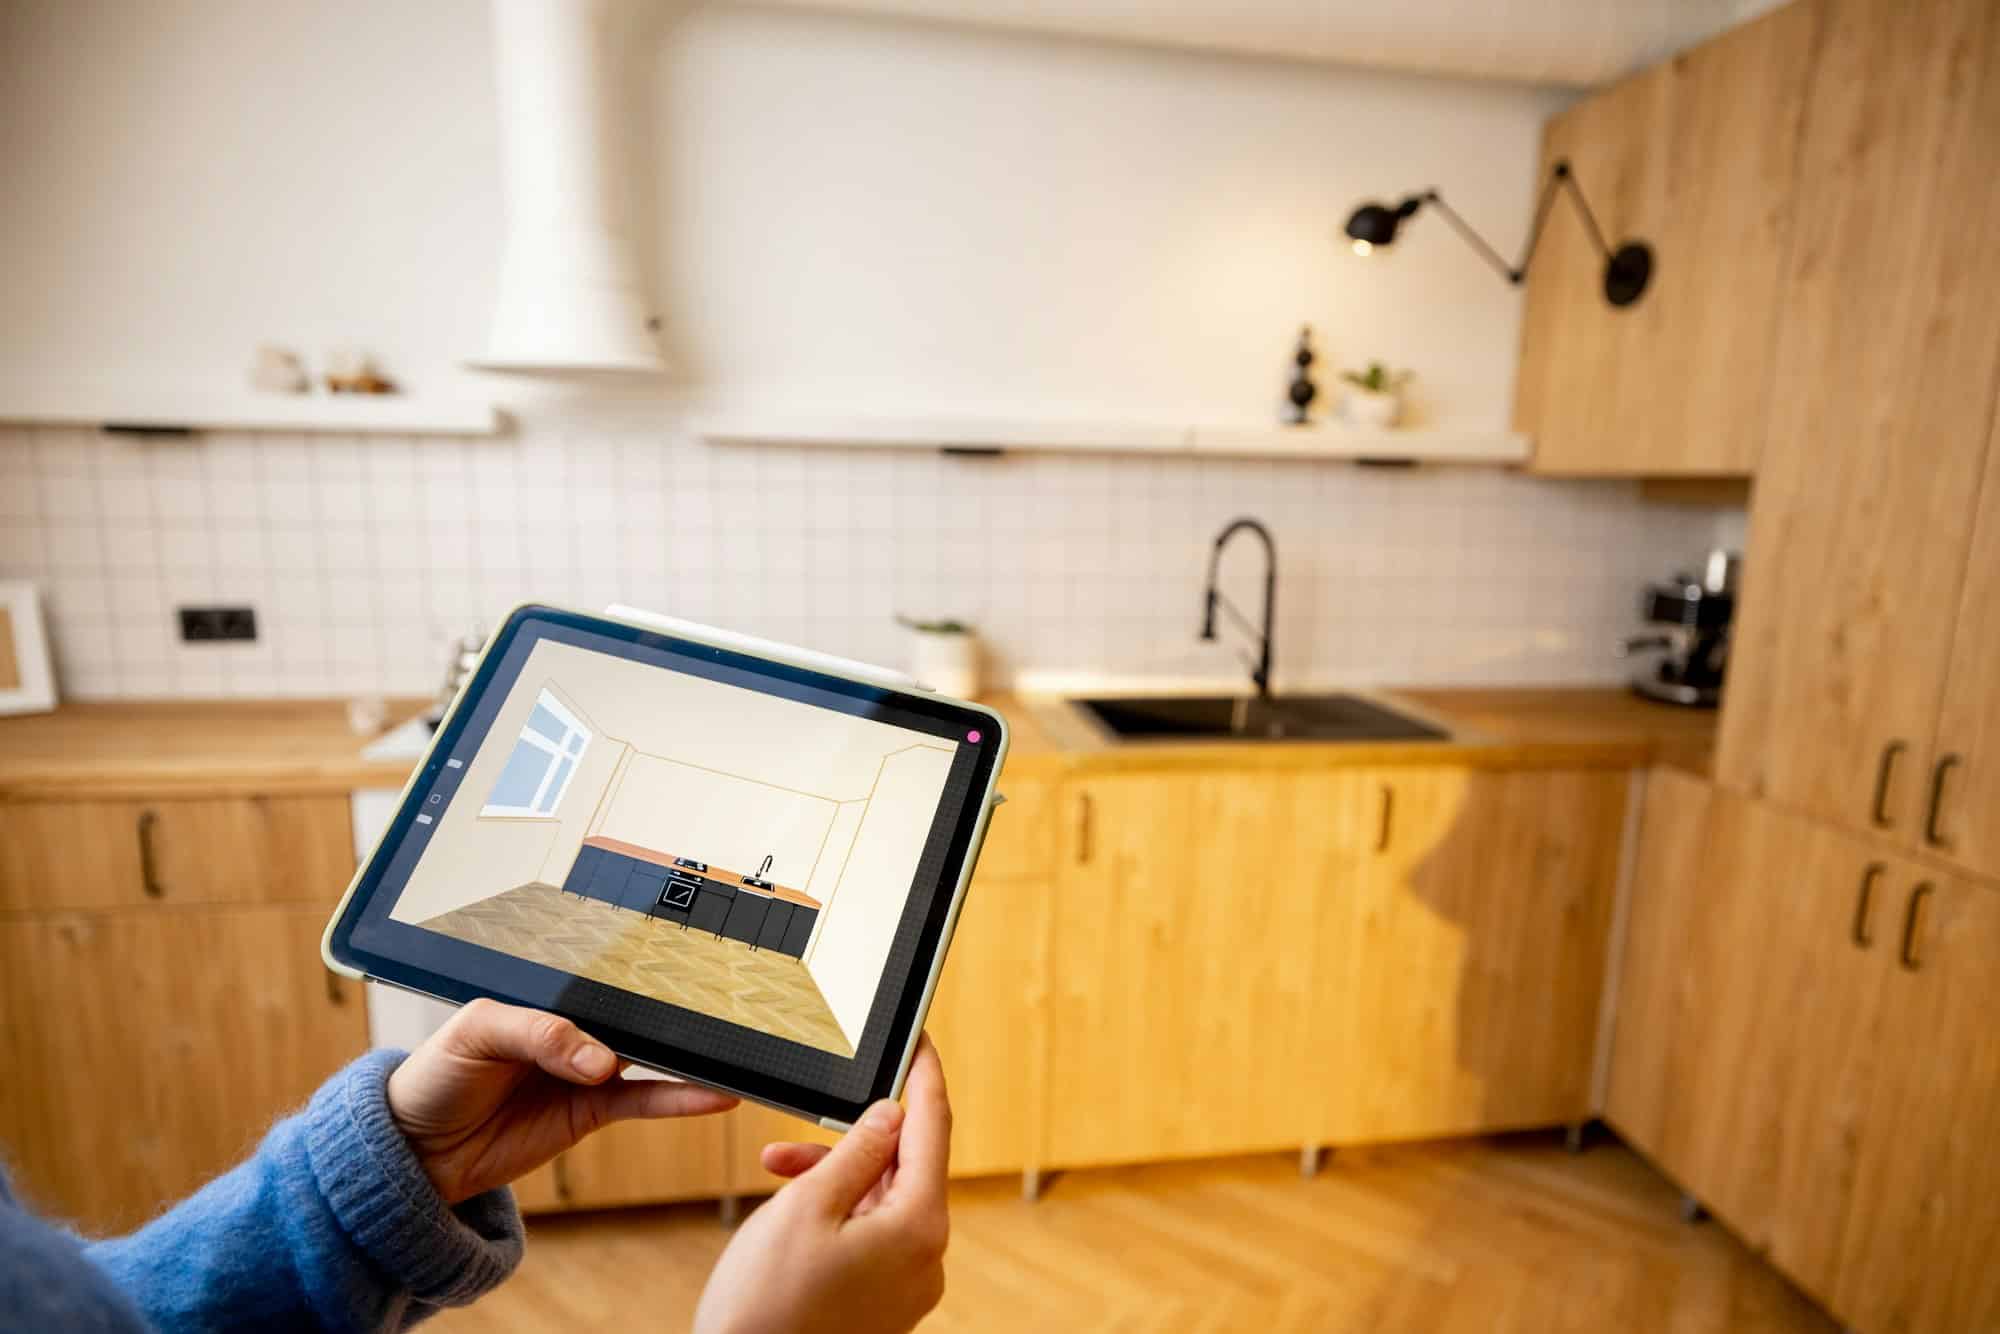 Designing kitchen space with a digital tablet